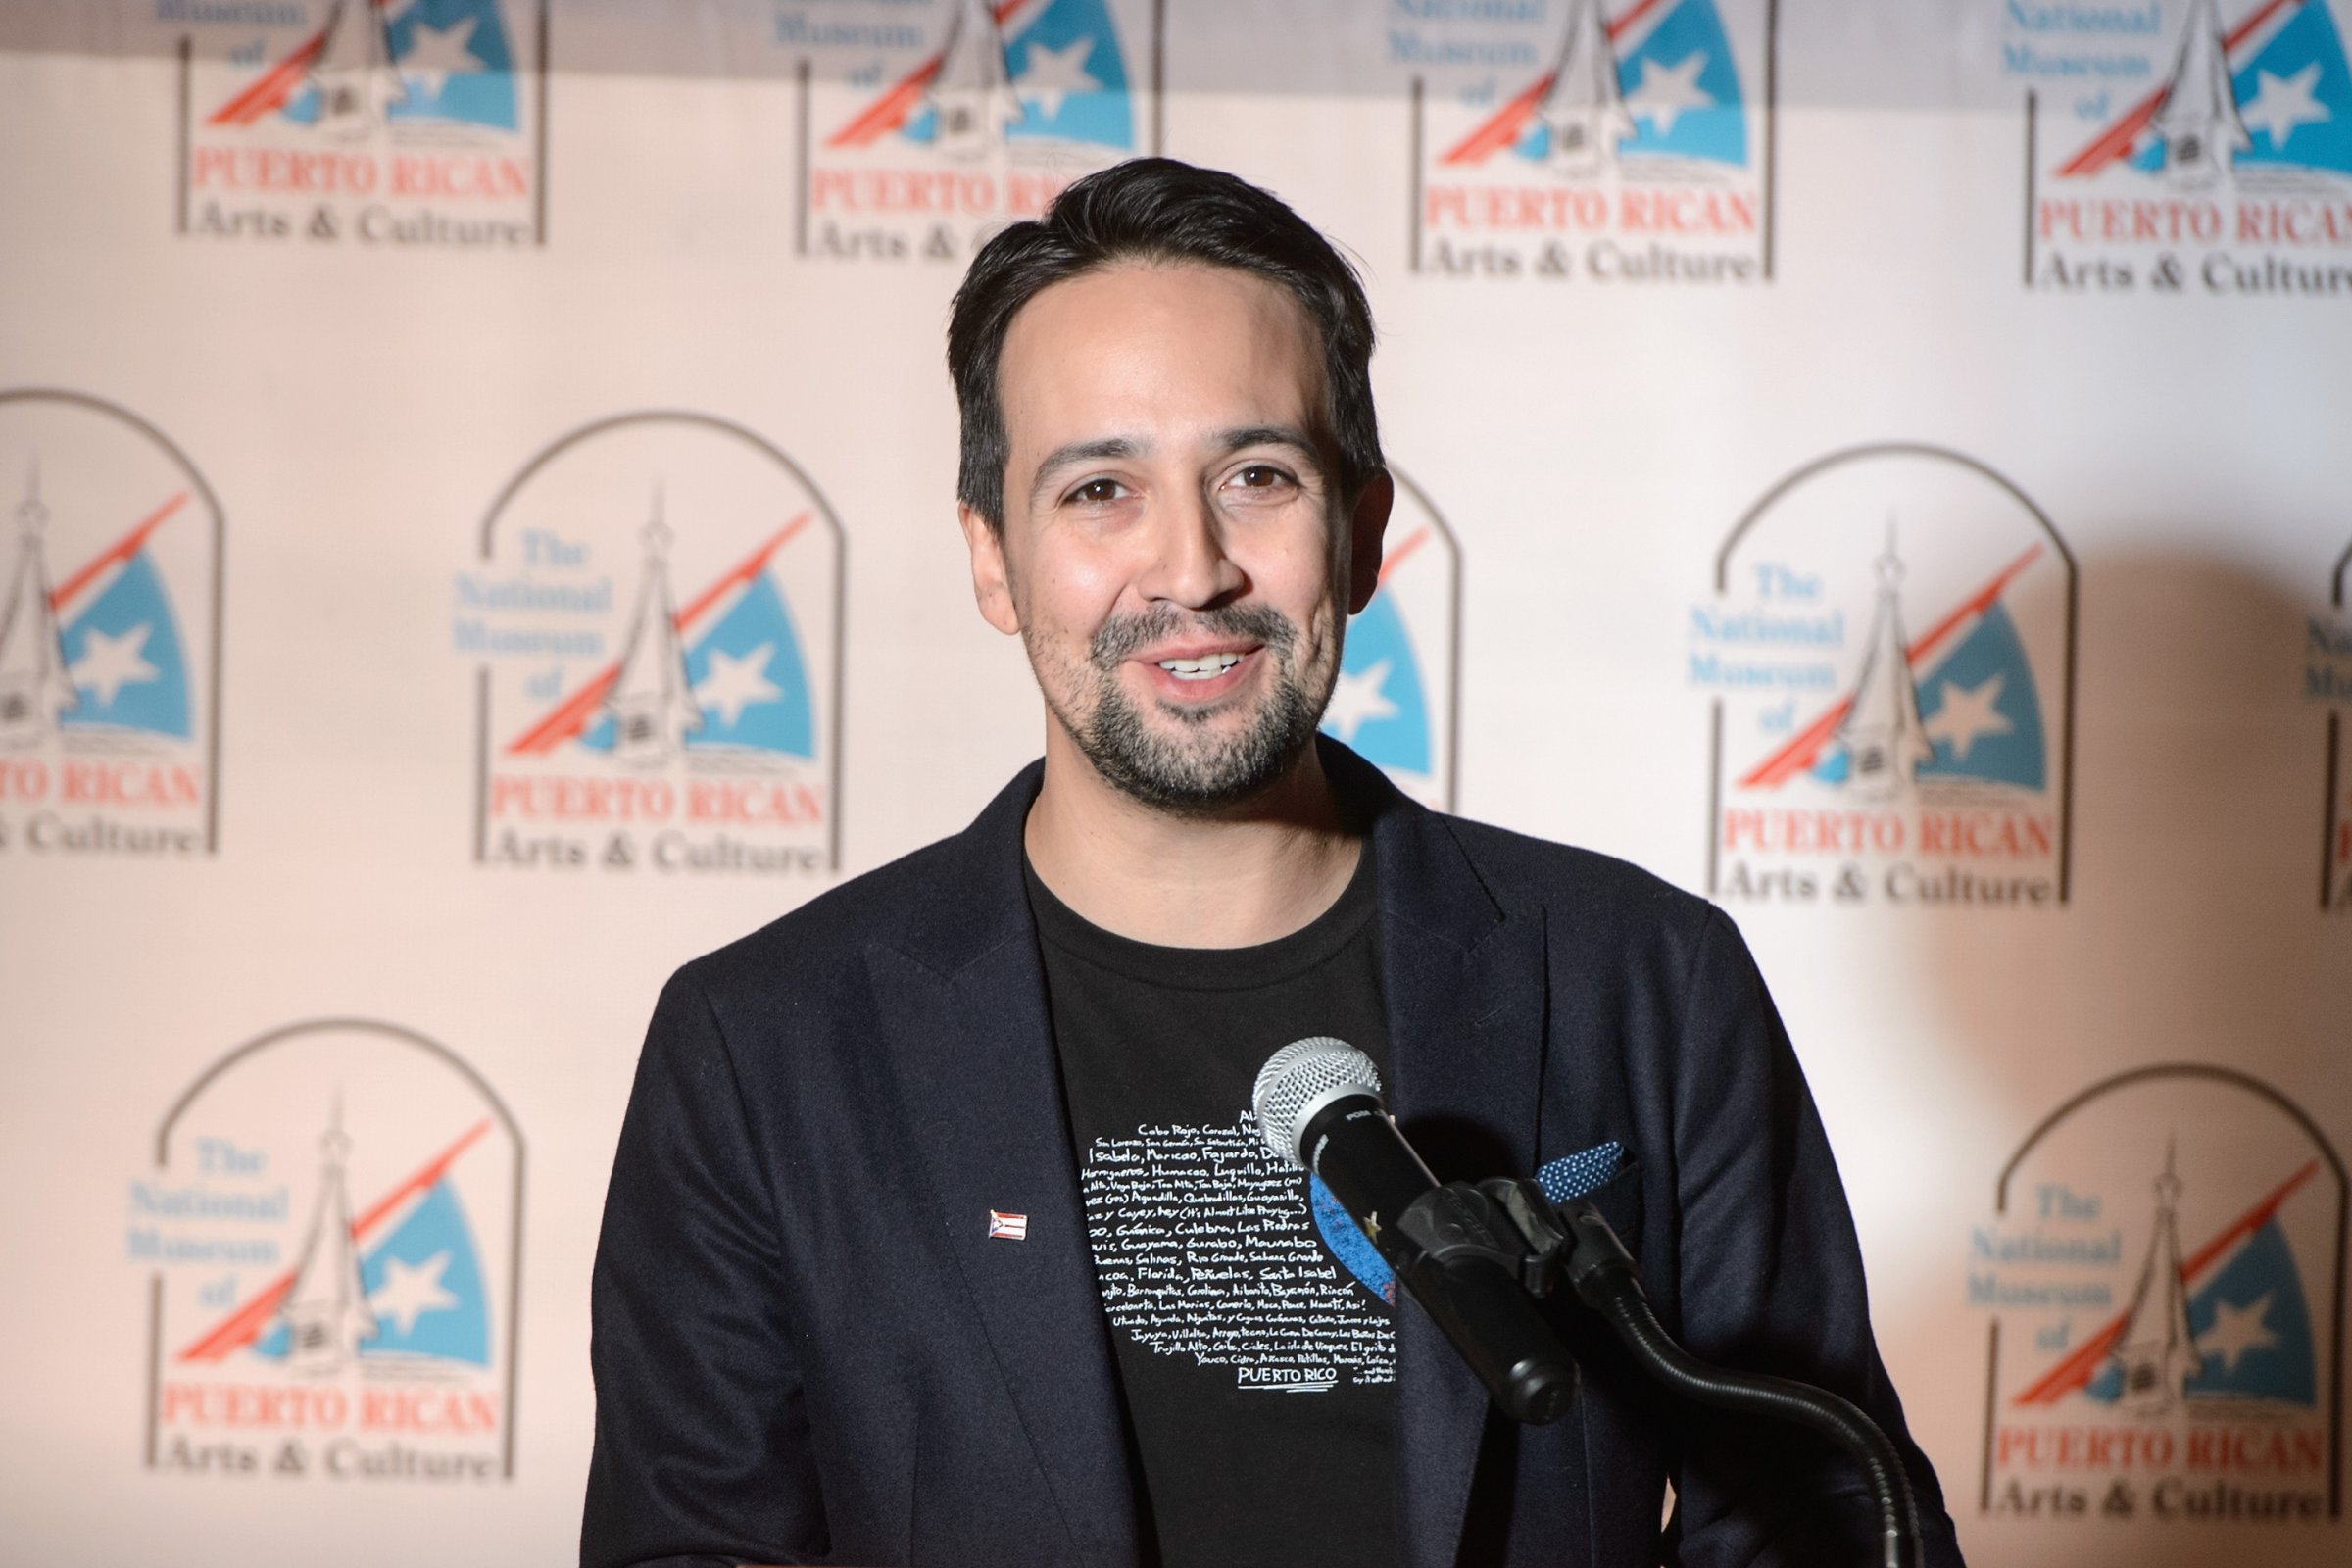 Lin-Manuel Miranda Joins The National Museum Of Puerto Rican Arts &amp; Culture To Highlight The Needs Of Puerto Rico And The Impact Of Chicago Efforts In The Wake Of Hurricane Maria